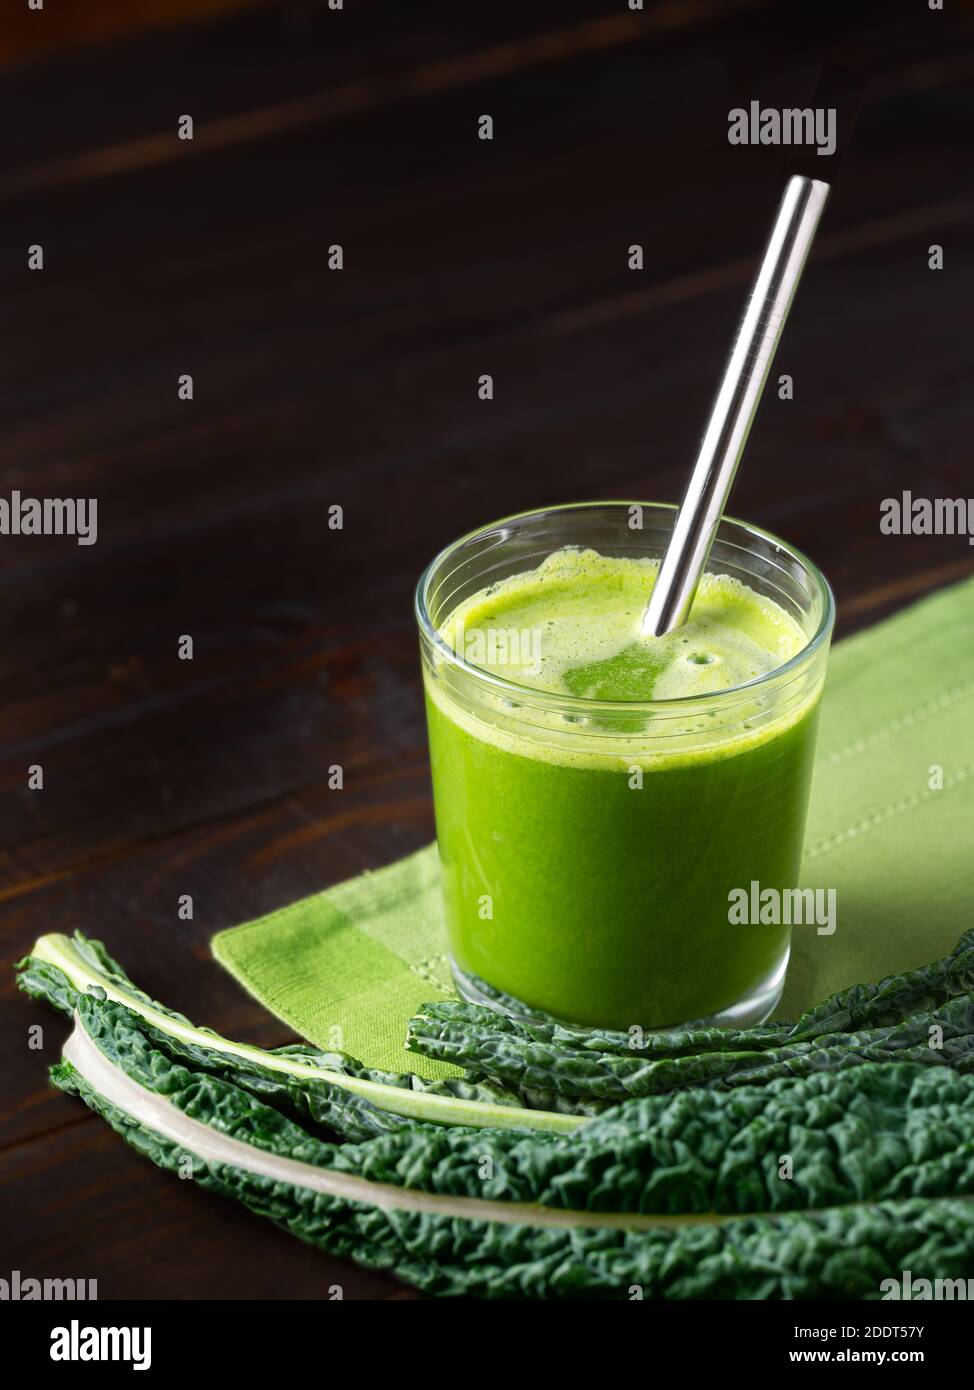 Glass of fresh organic vegetable juice with Dino kale on a wooden surface with a stainless steel drinking straw; copy space Stock Photo